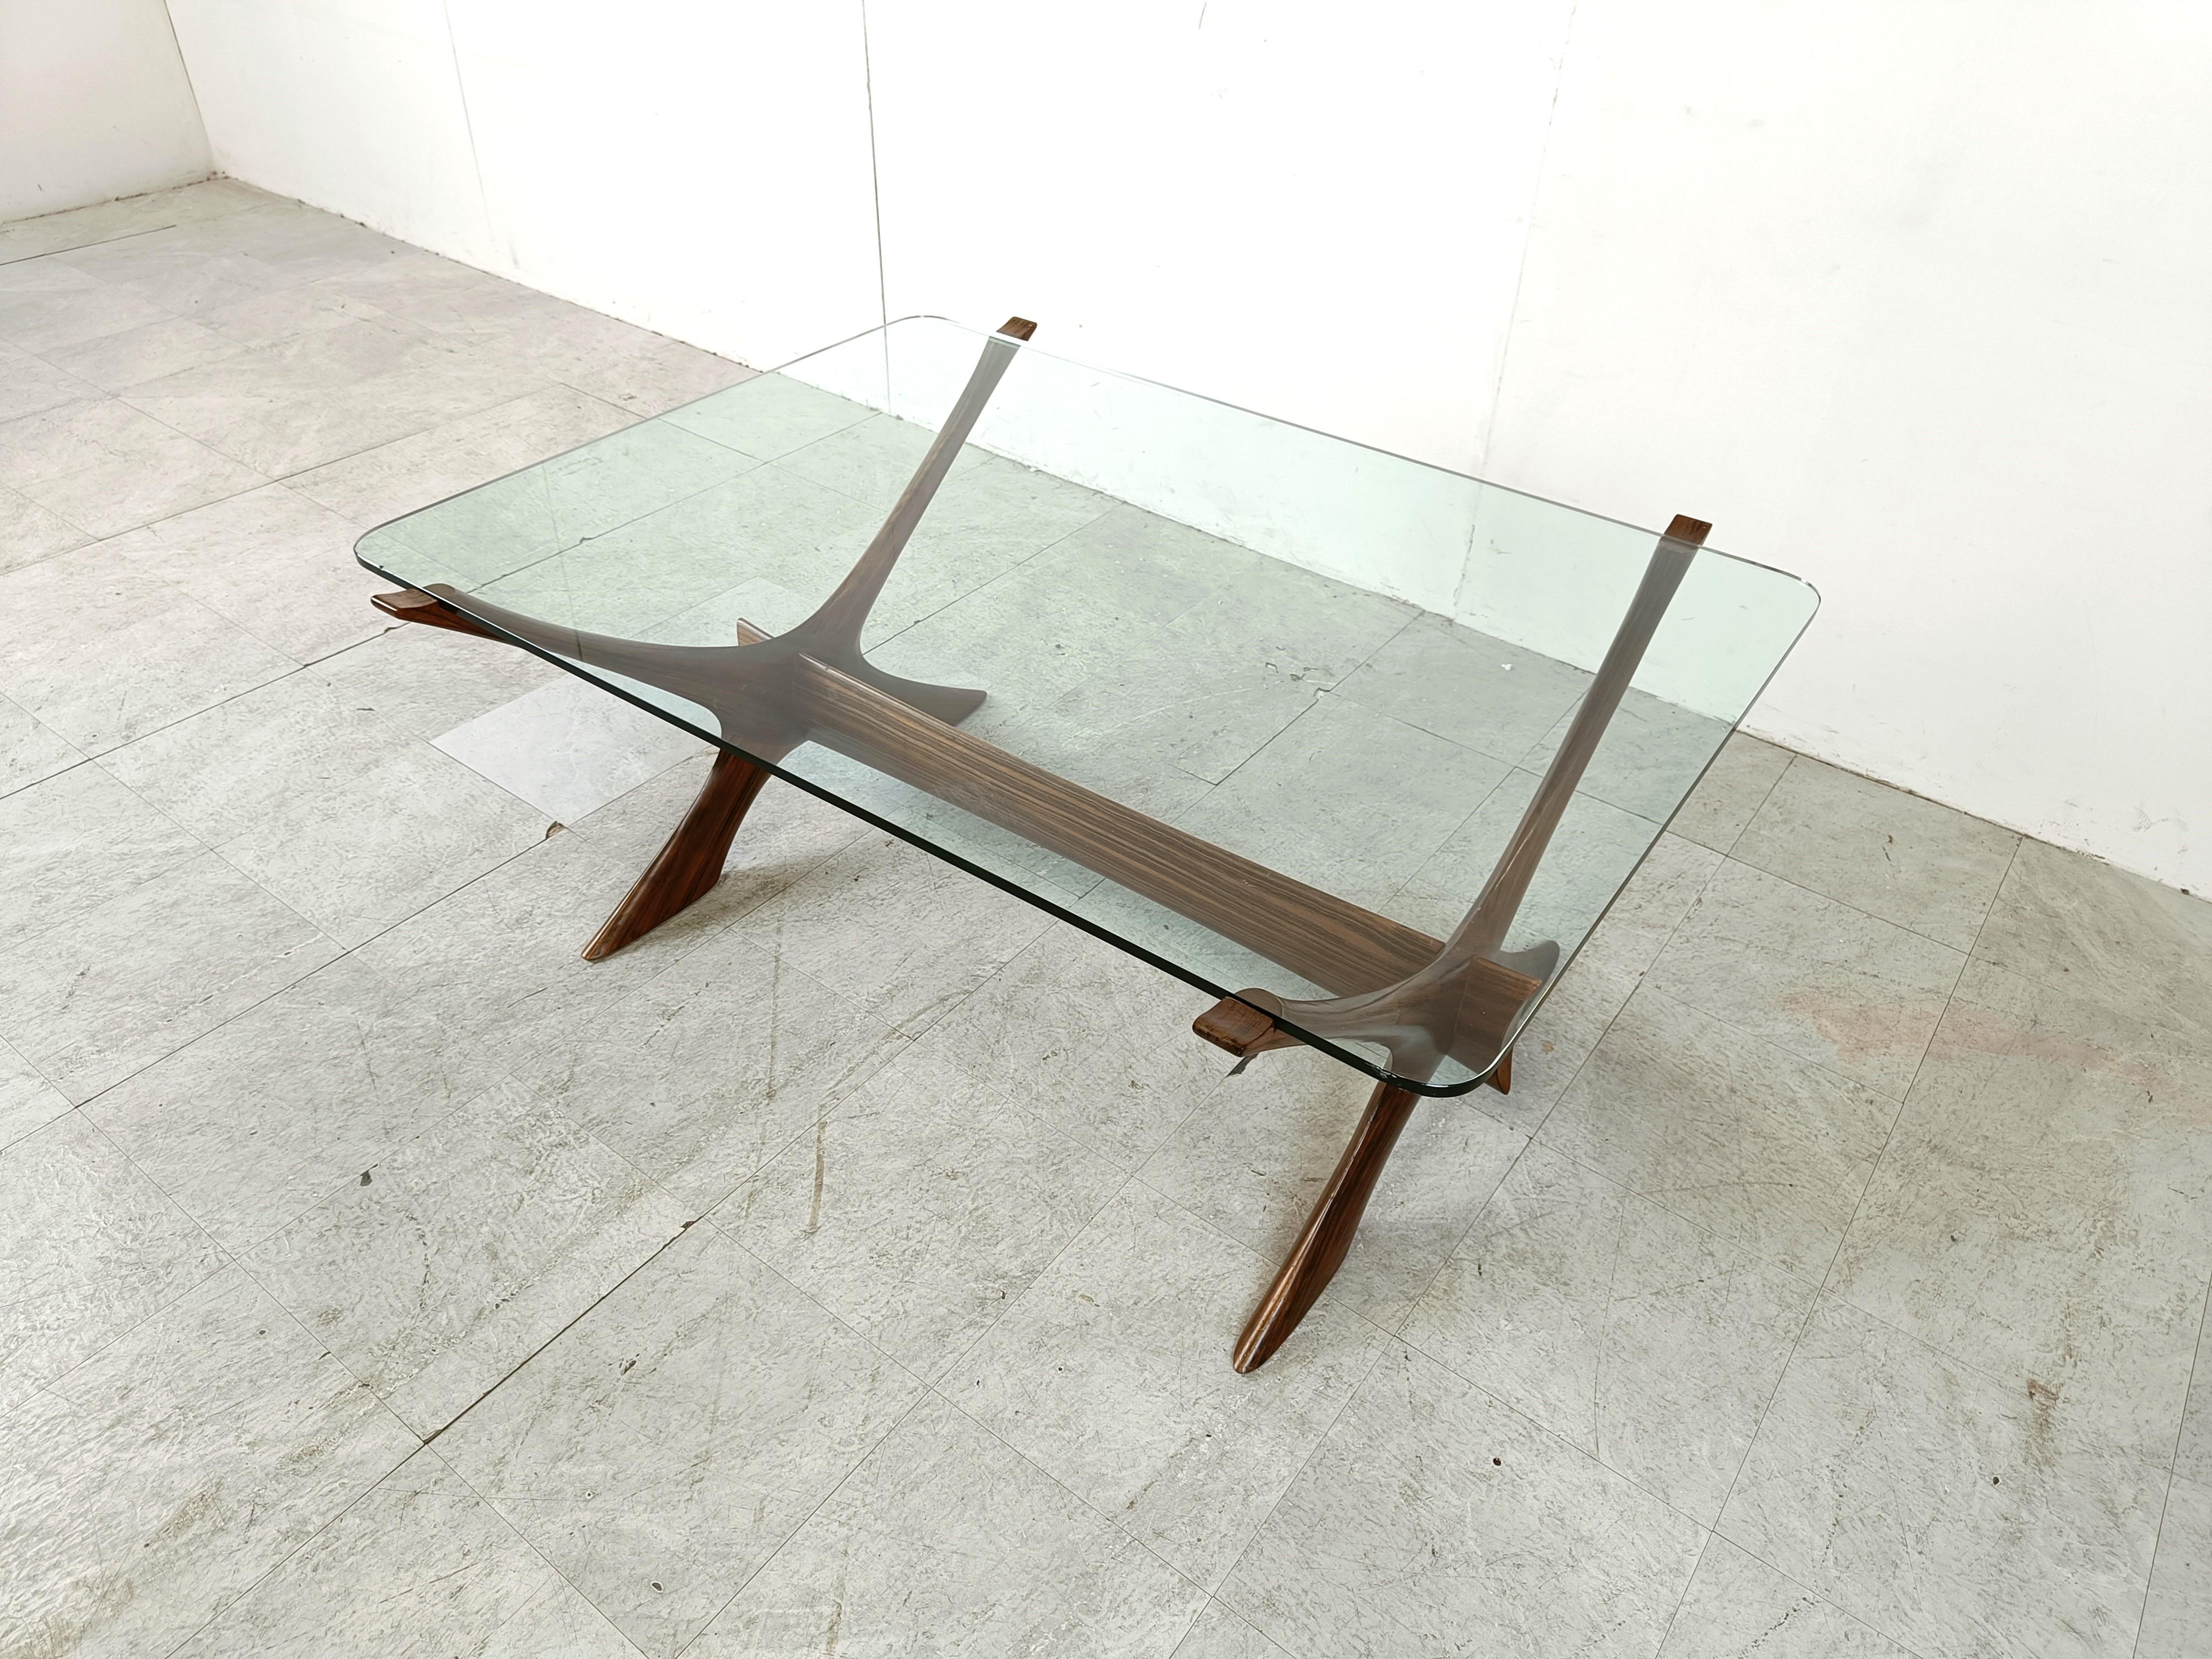 Spectacular mid century coffee table designed by  Fredrik Schriever-Abeln for the swedish company Örebro Glasfabrik.

The table is beautiful to look at from every angle and features a beautifully made teak frame and clear glass top.

1960s -